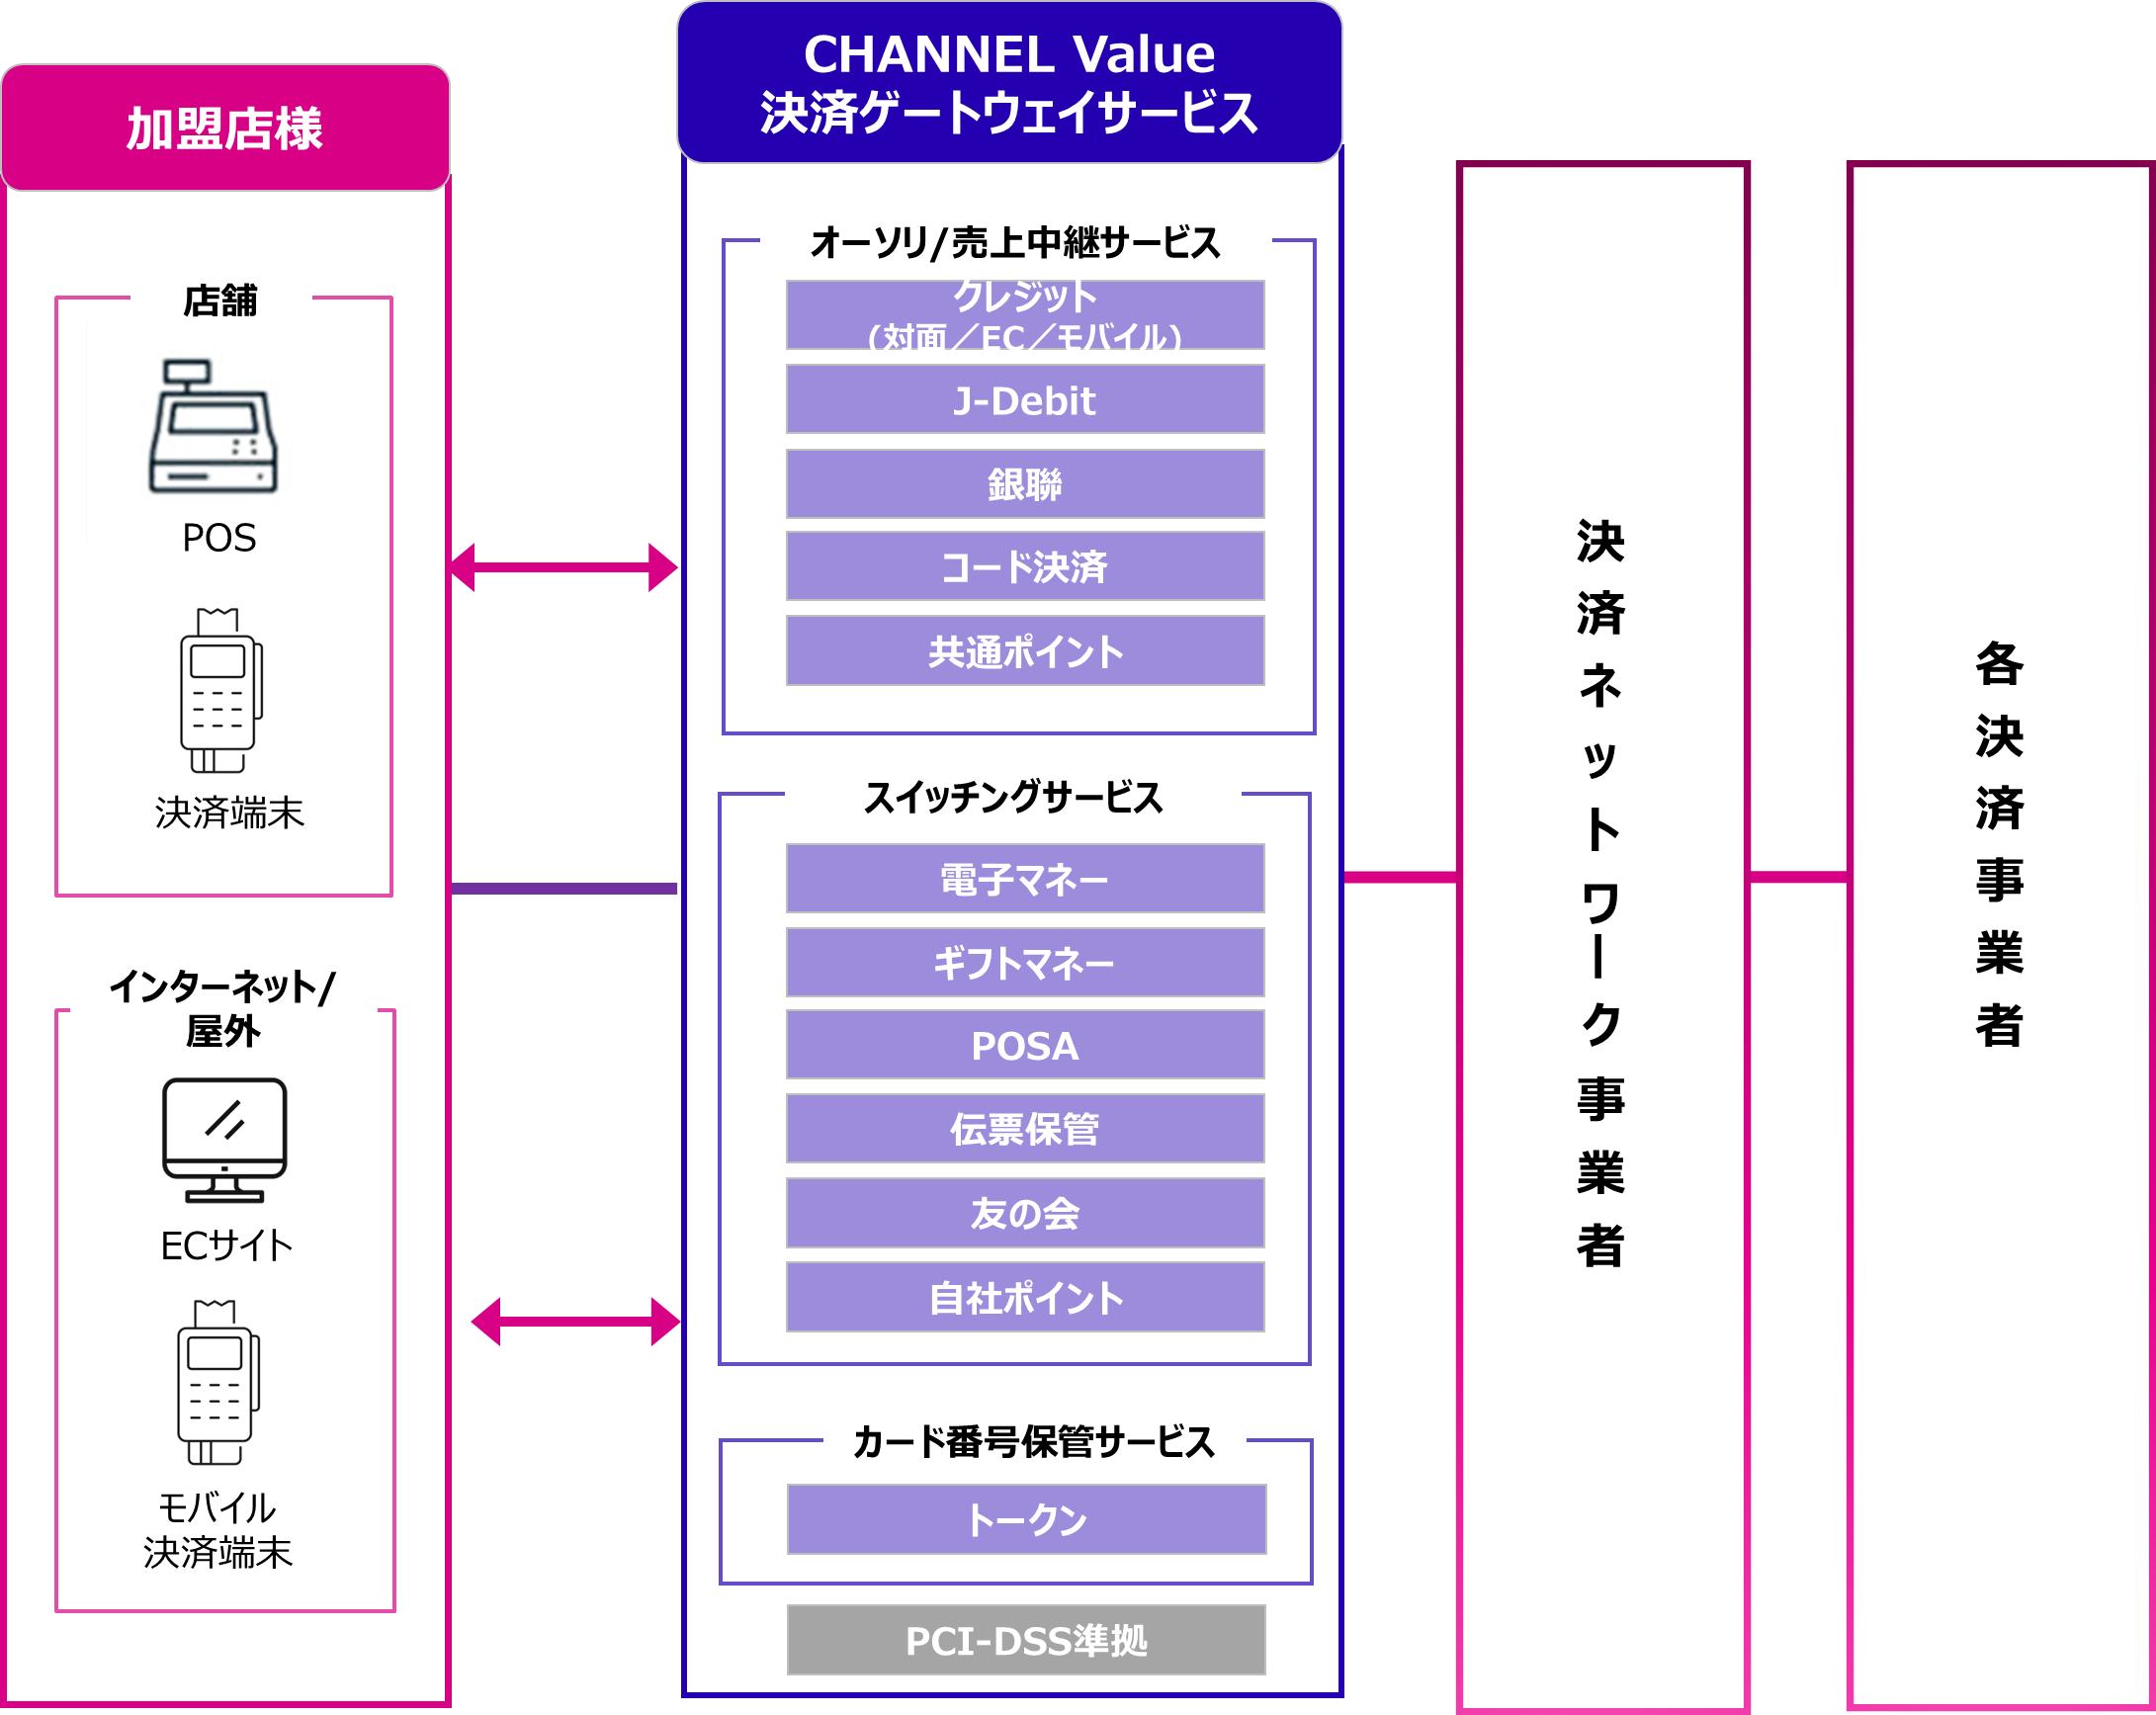 CHANNELValueサービス概要